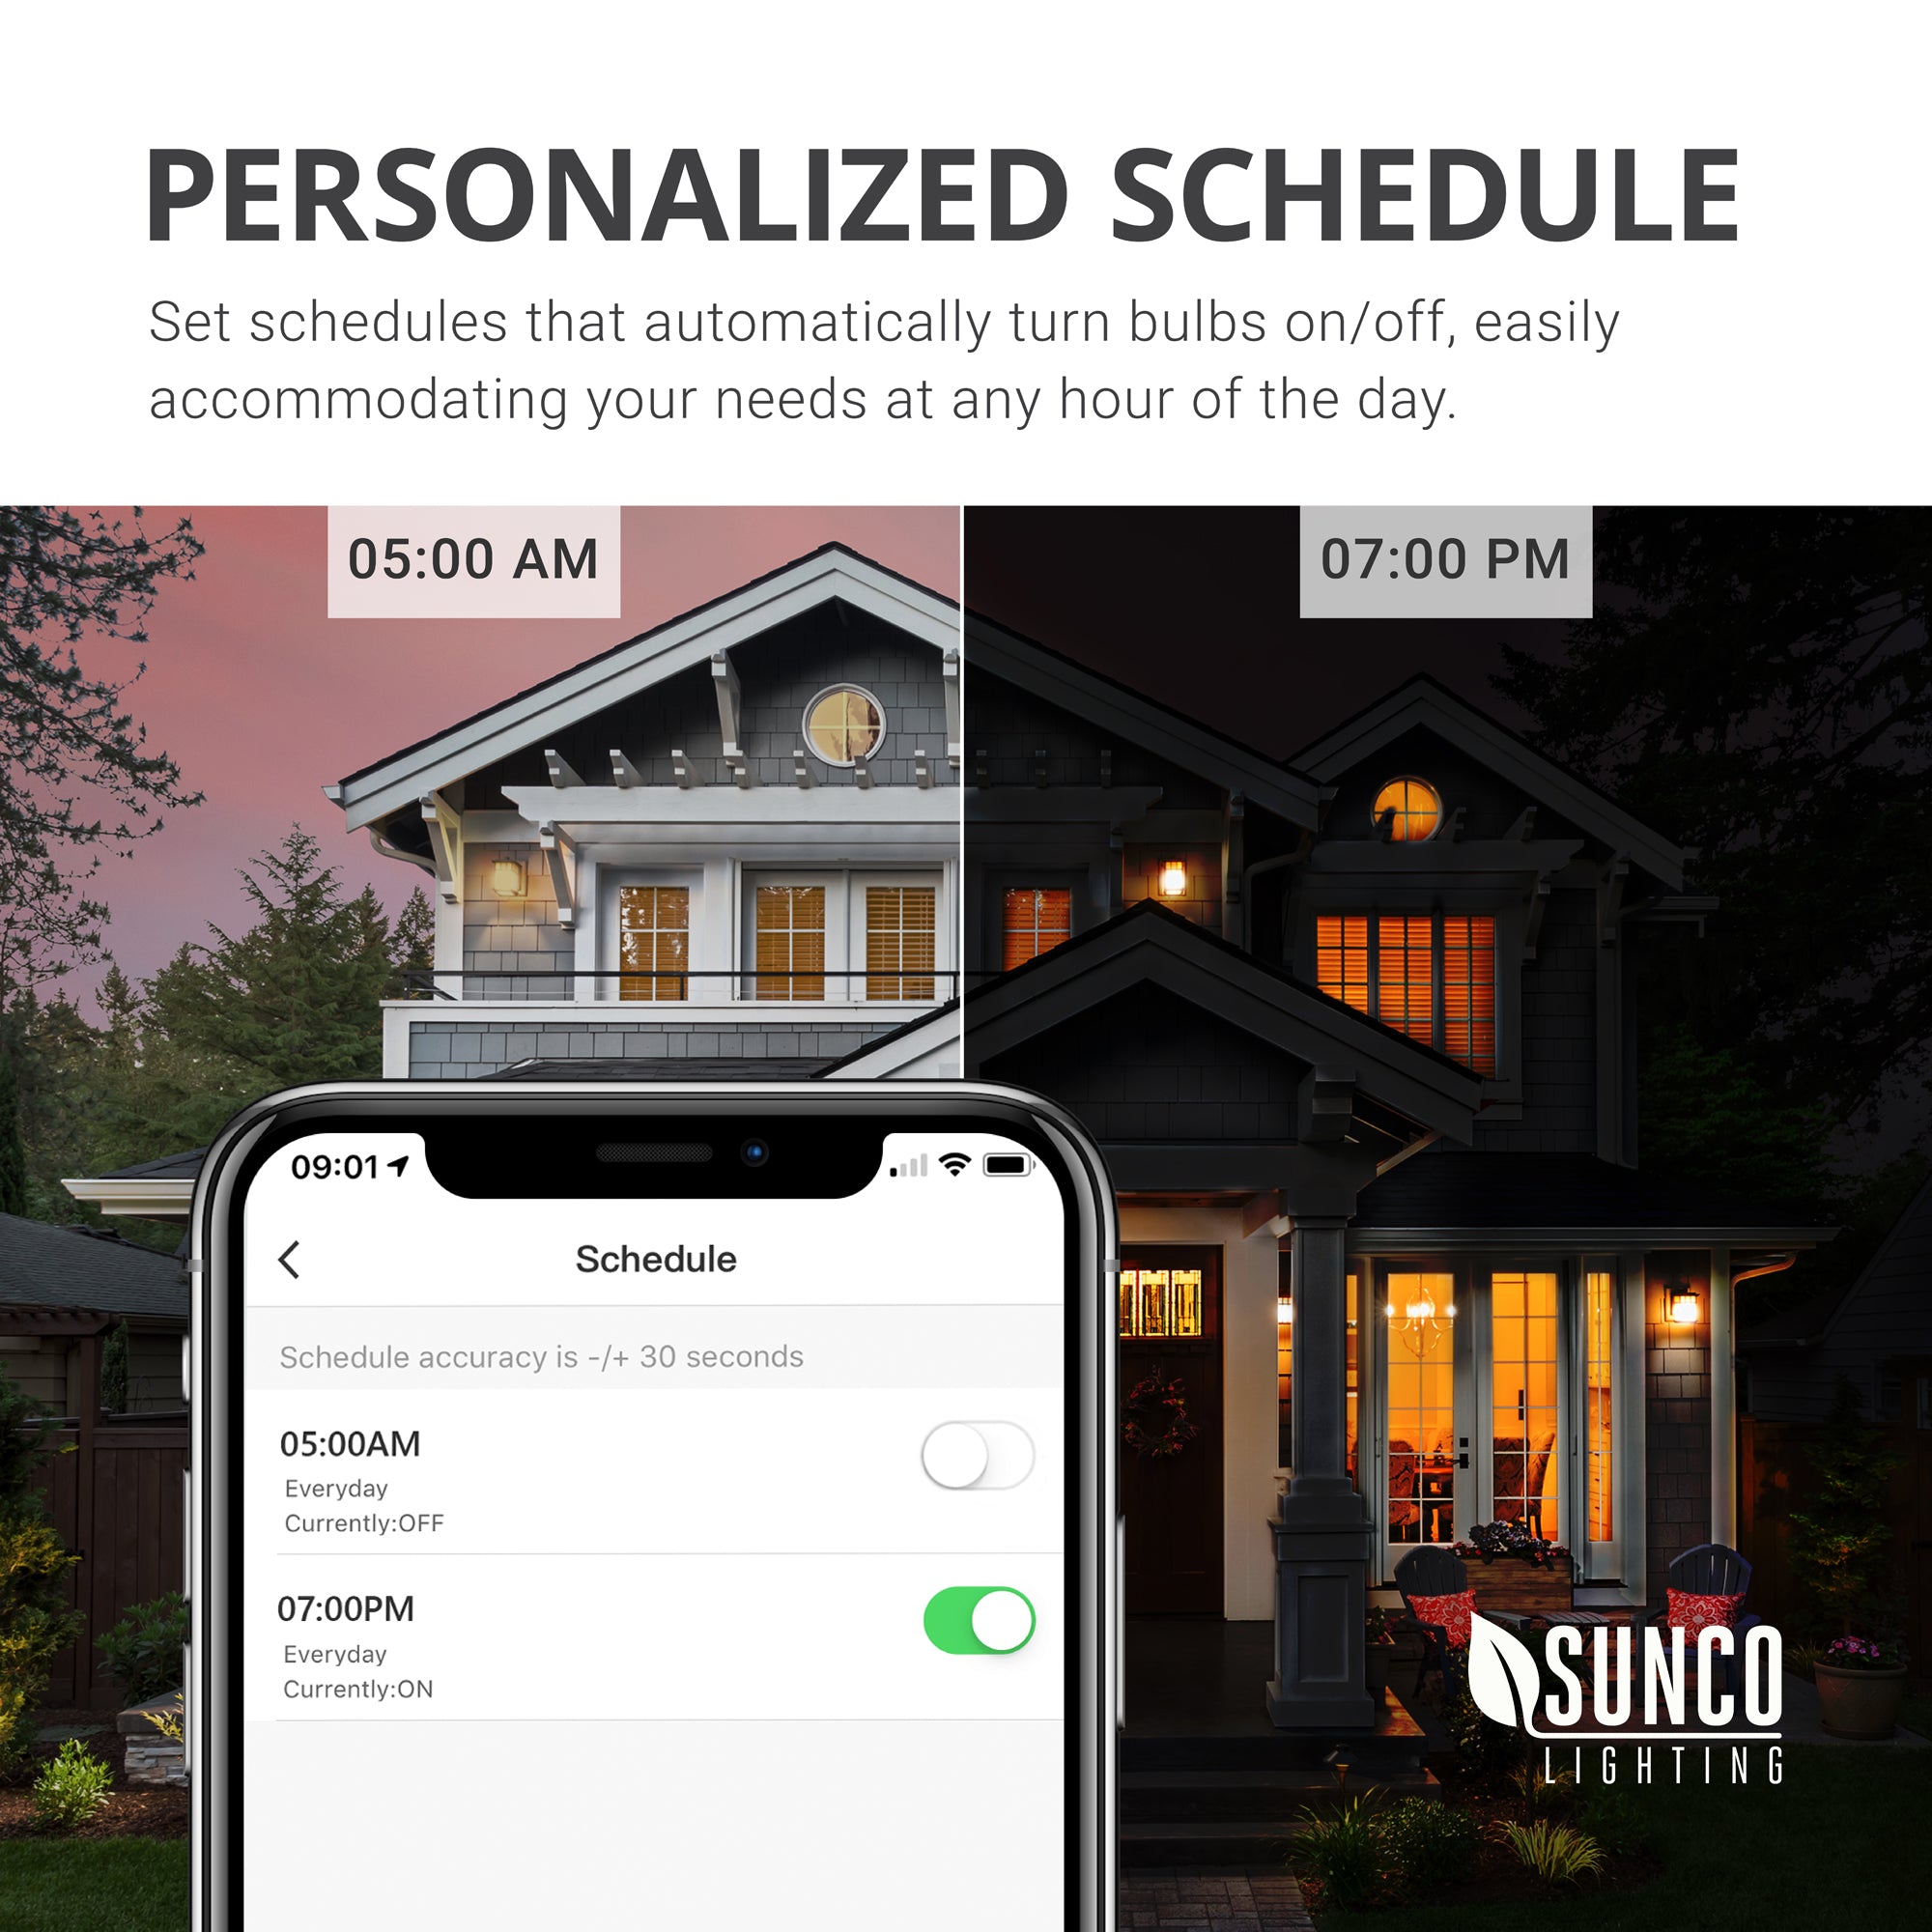 You can personalize the schedule of your PAR30 LED Smart Bulb from Sunco. Set schedules that automatically turn bulbs on or off to easily accommodate your needs at any hour of the day. Image shows phone screen with app as you schedule the timing of your smart bulbs and a house at night and during the day.